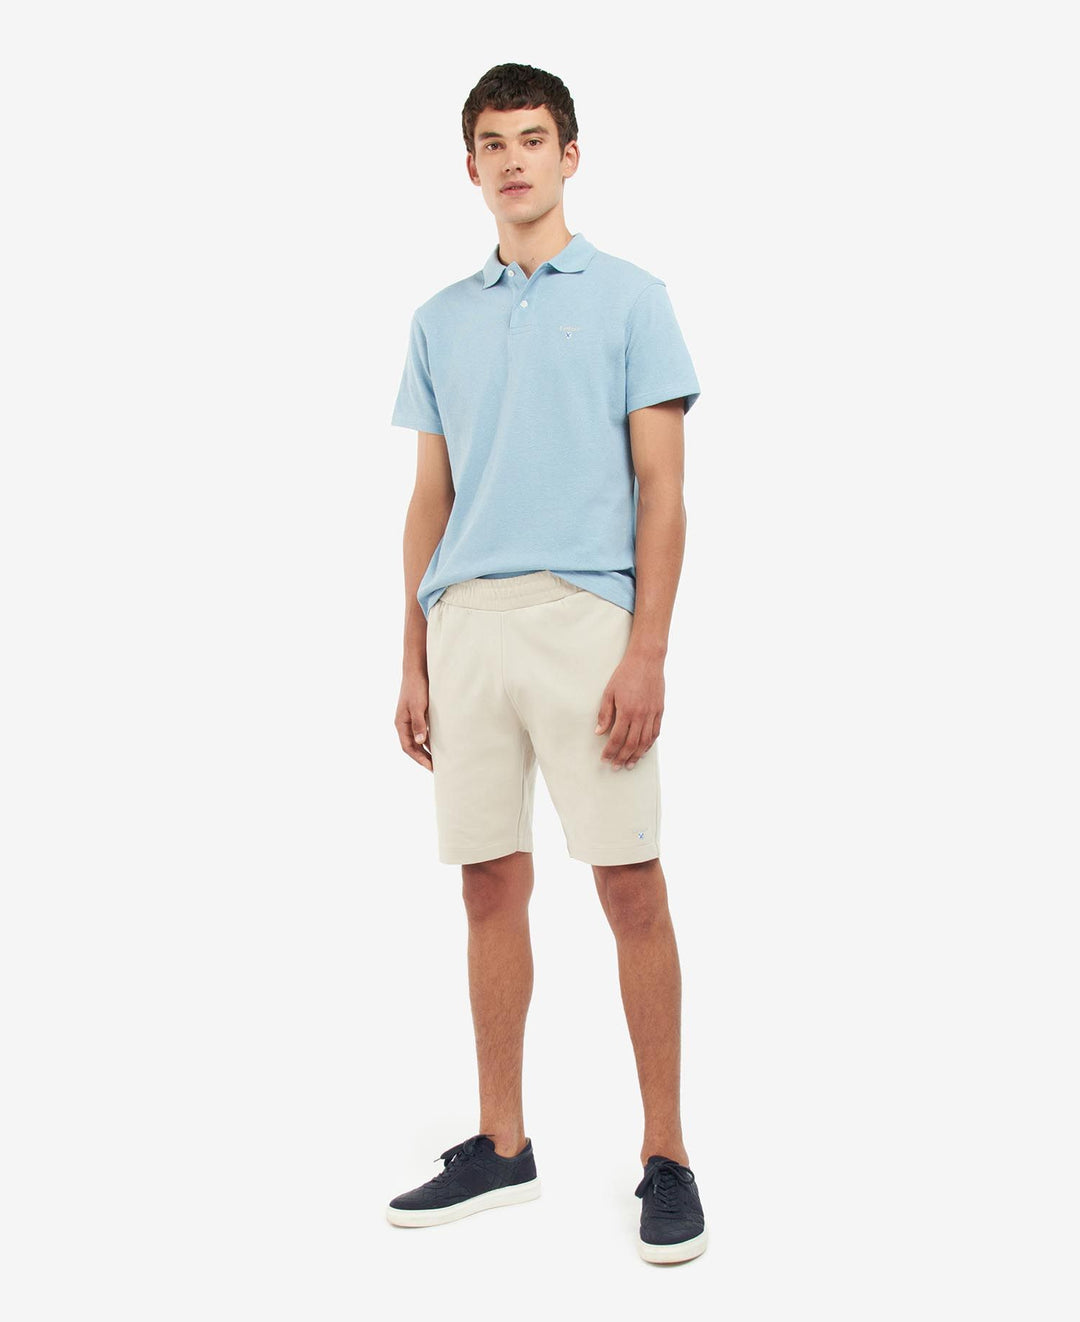 Barbour Cleatlm Swt Short/Bermude MST0022